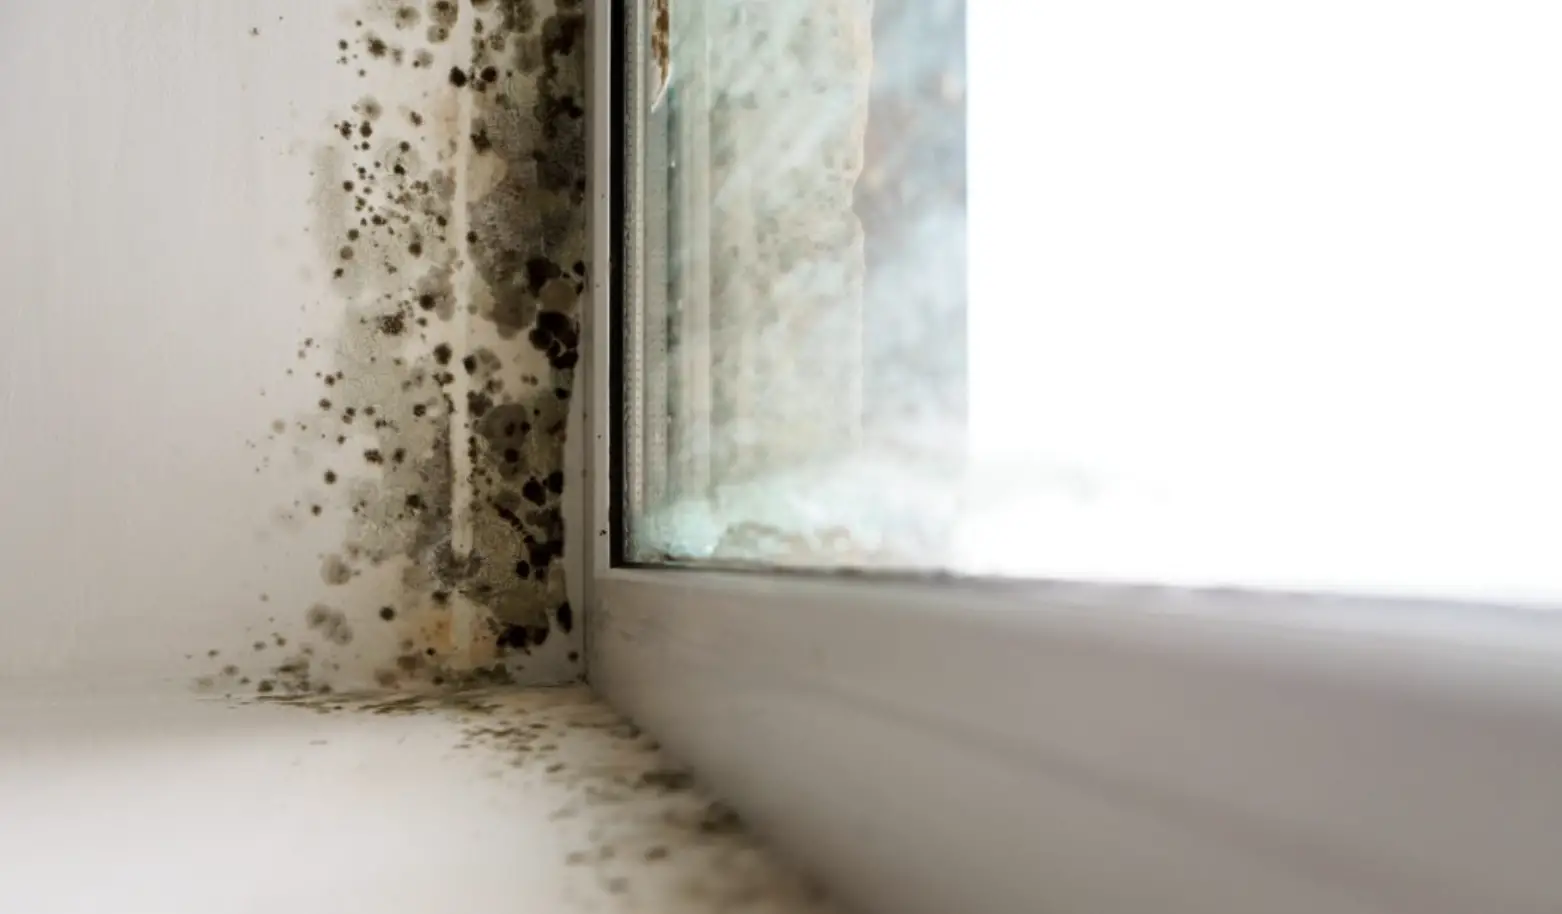 How to Tell if Your Home Has a Mold Problem